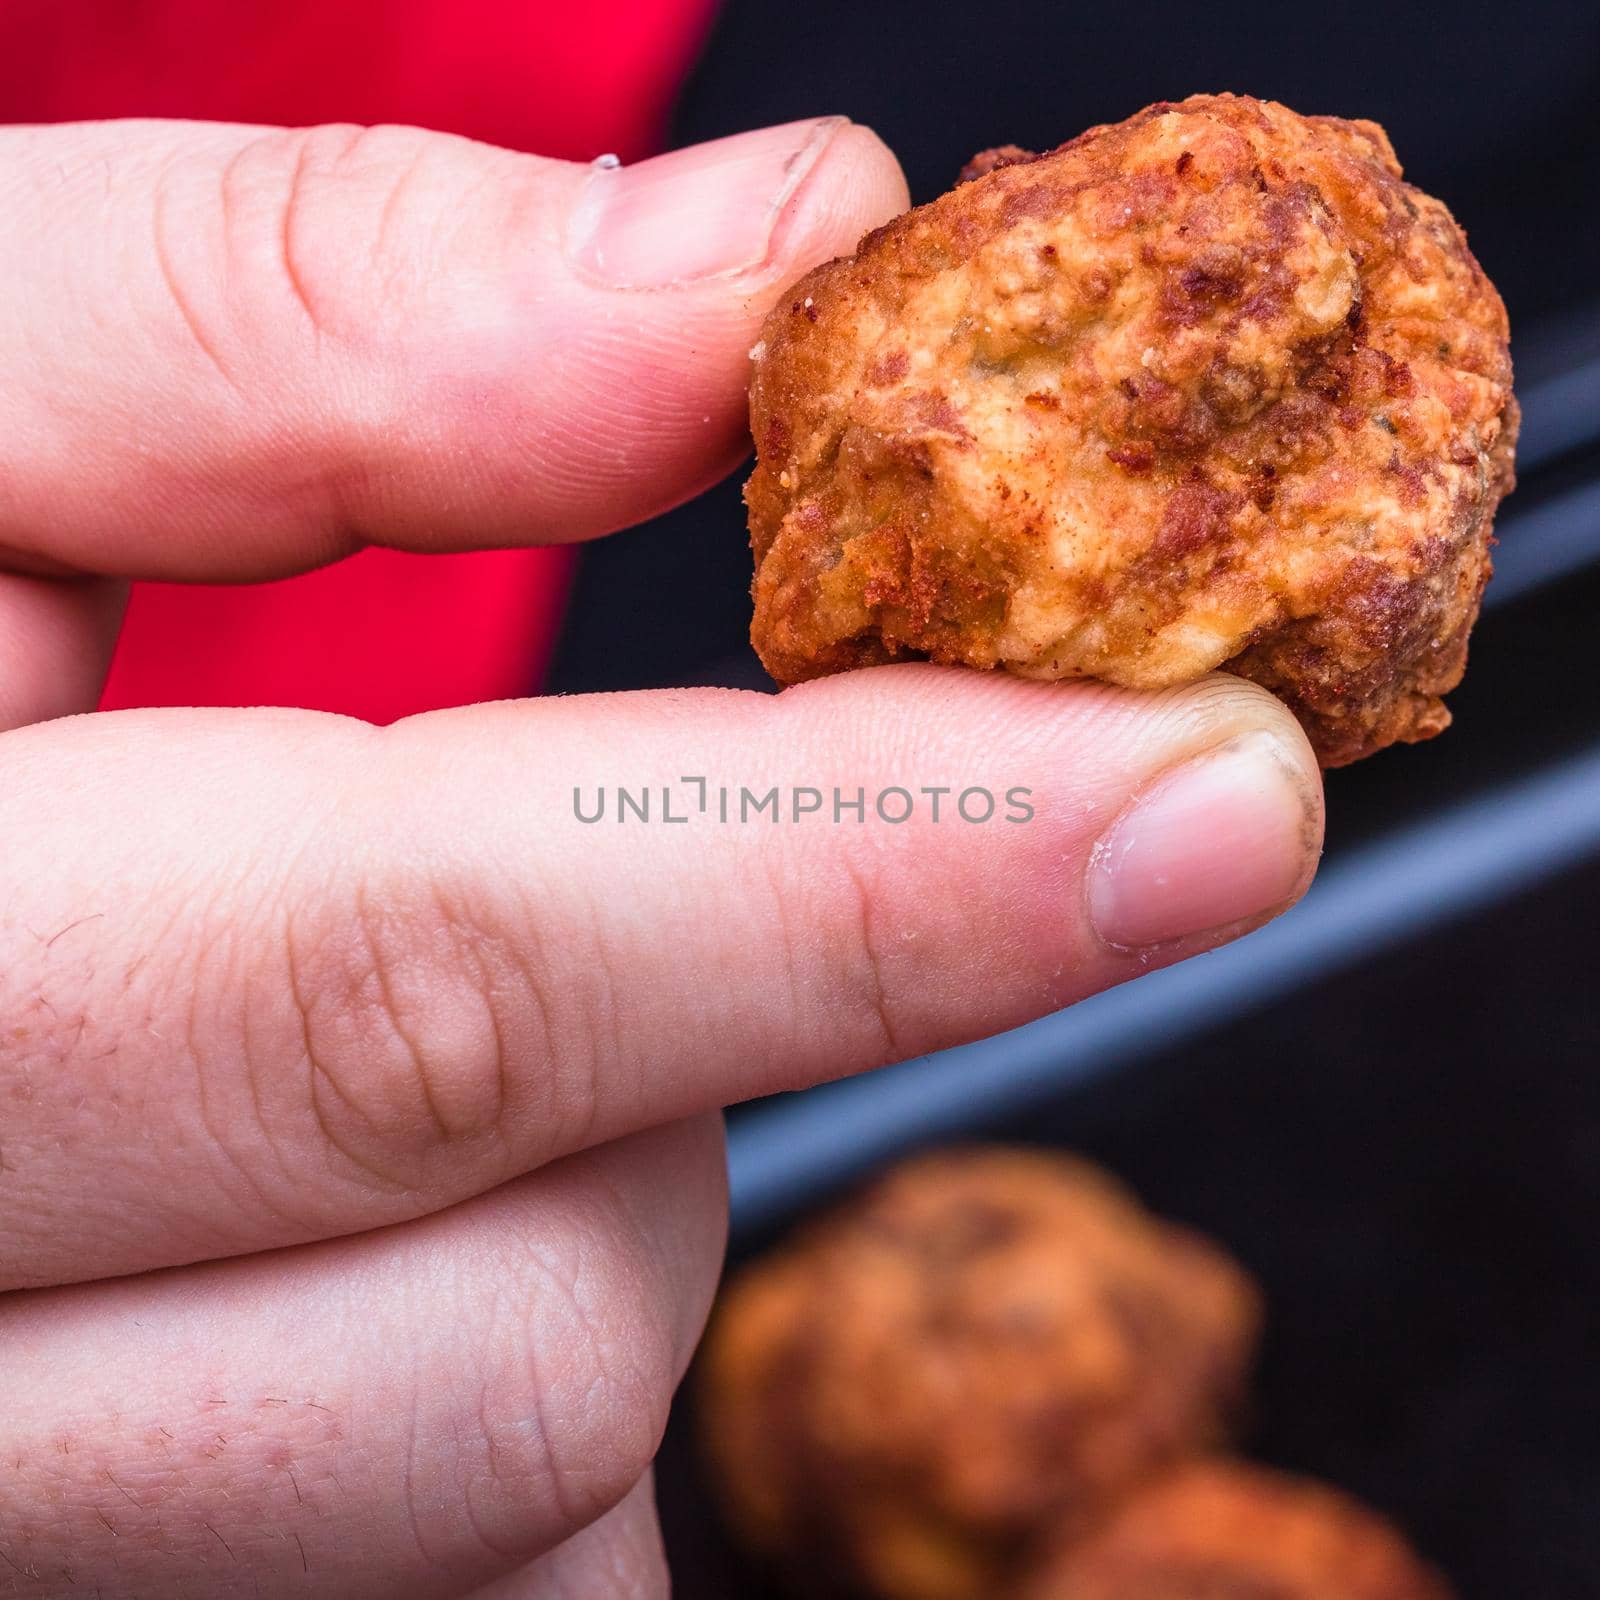 Details of fresh fried meatballs with spices. homemade food. Hand holding a fried meatball.